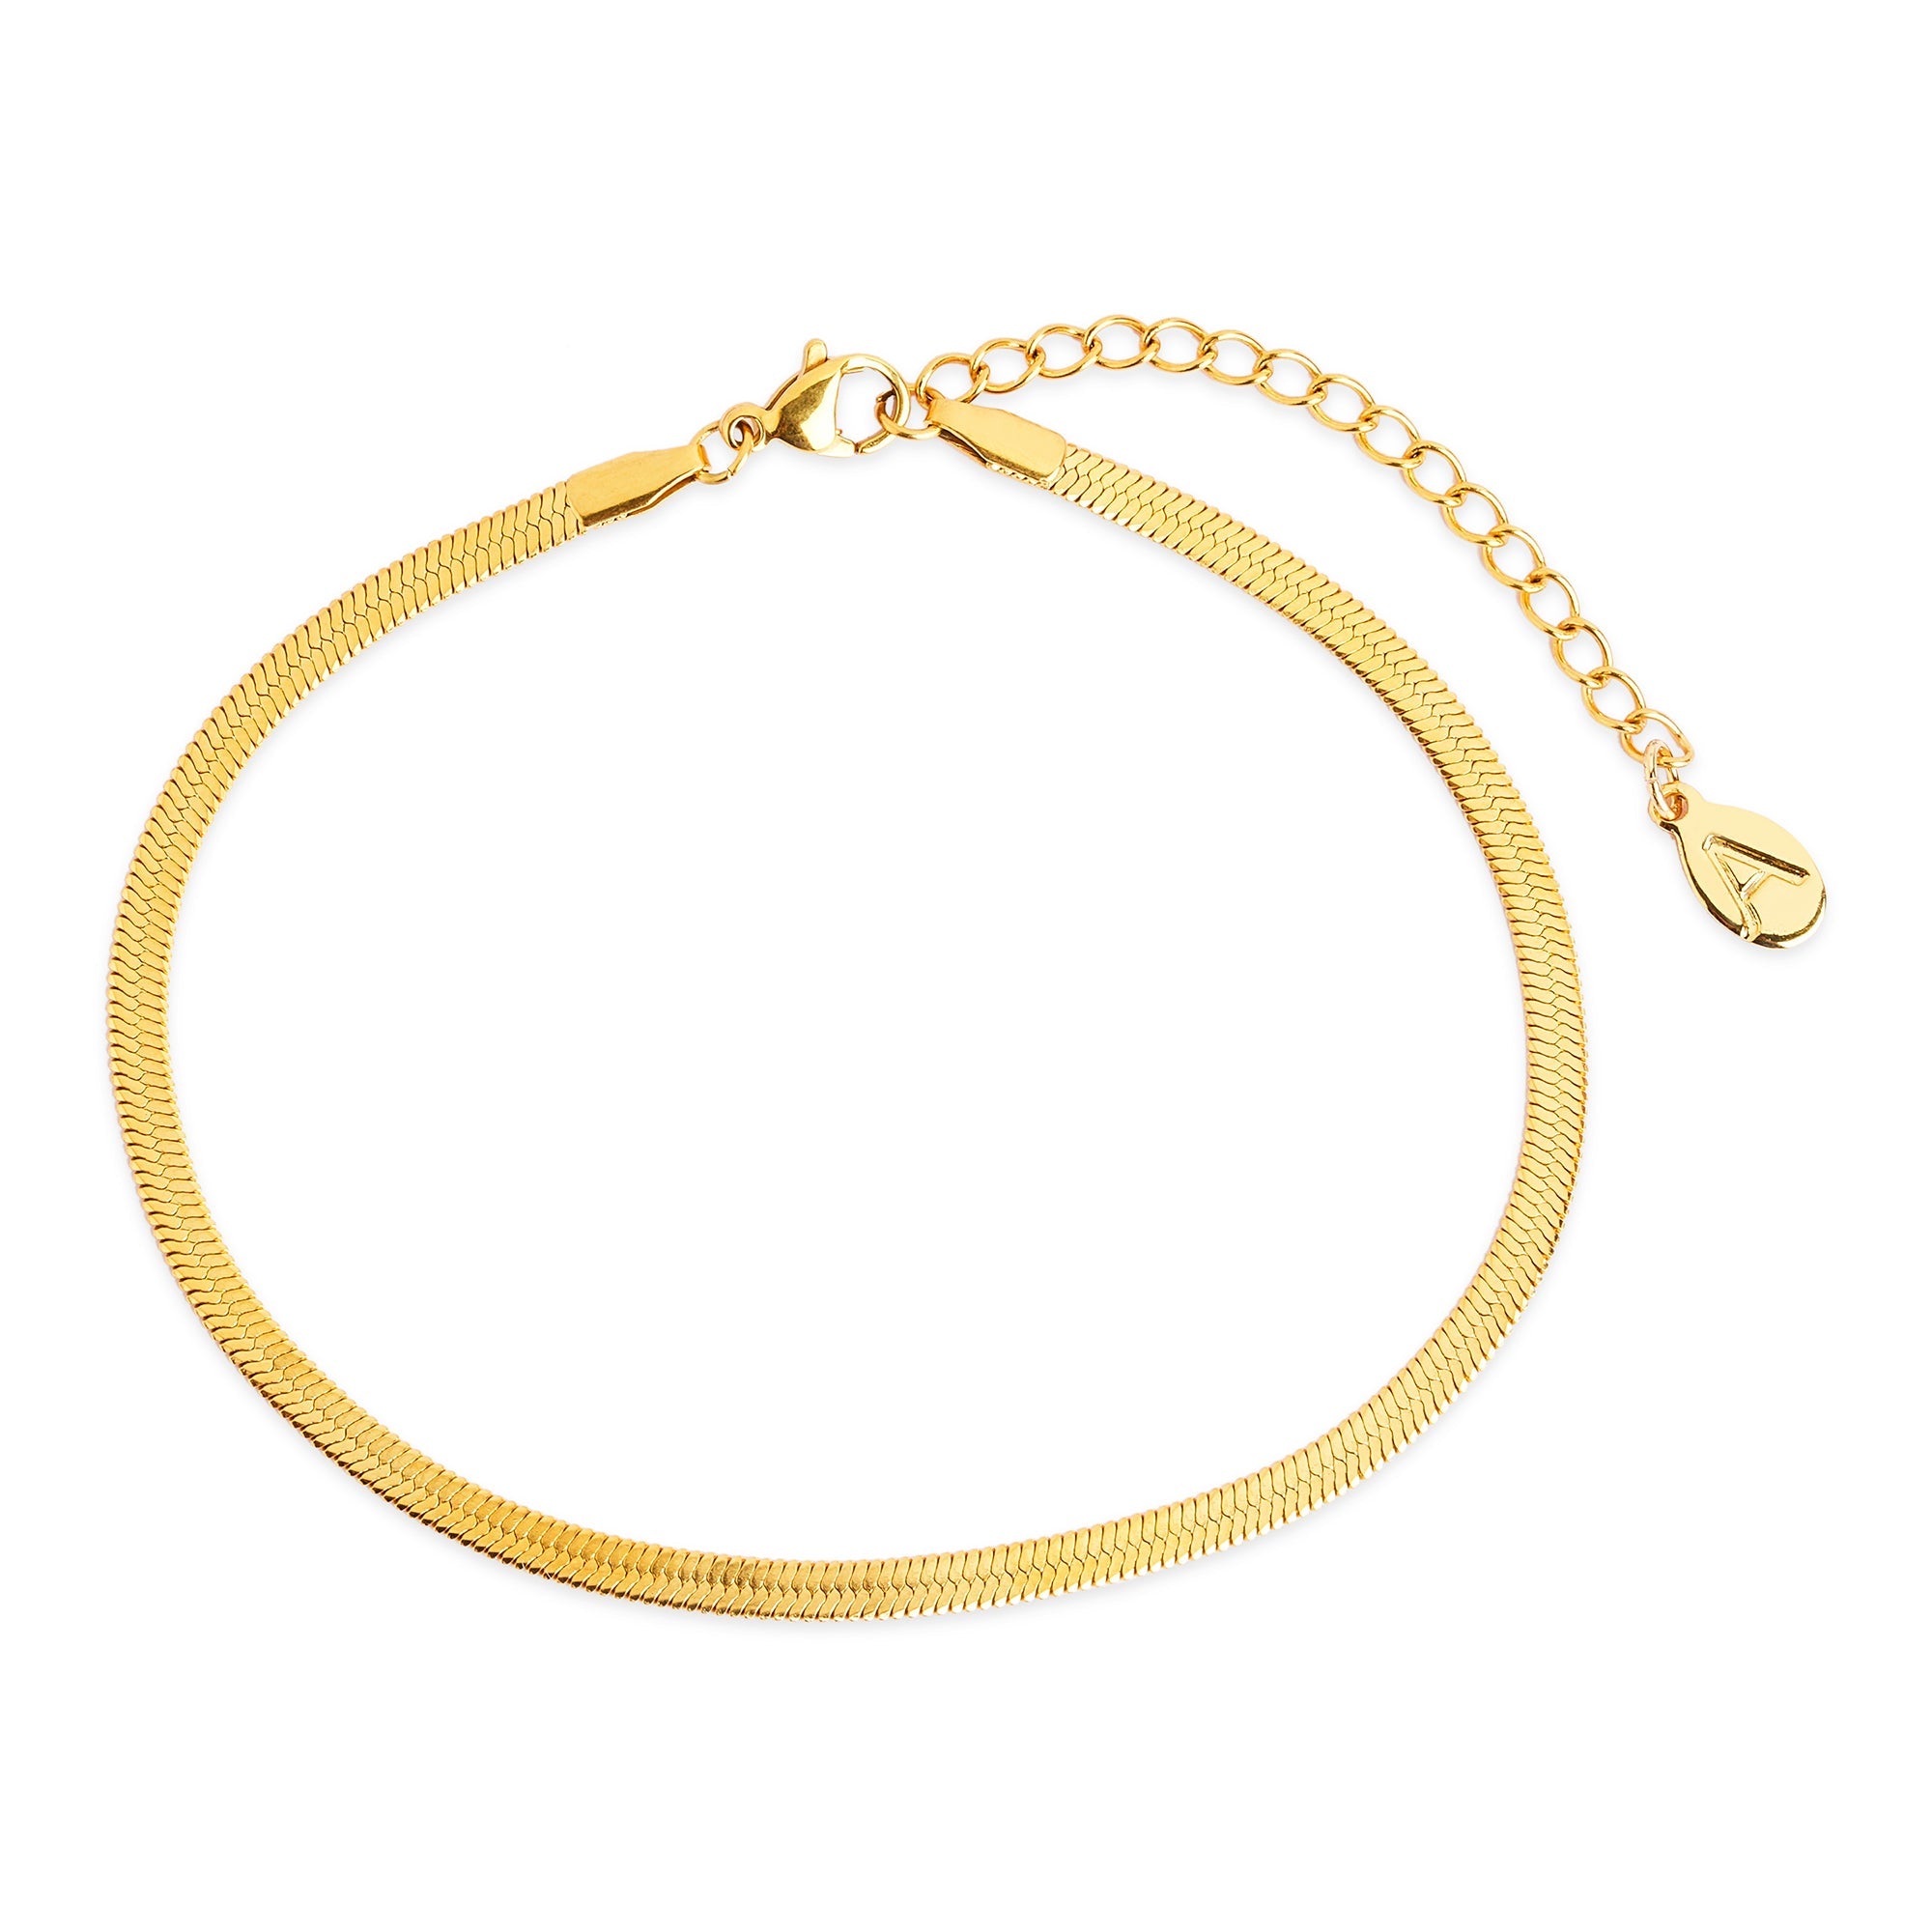 Accessorize London Women's Gold Stainless Steel Snake Chain Anklet